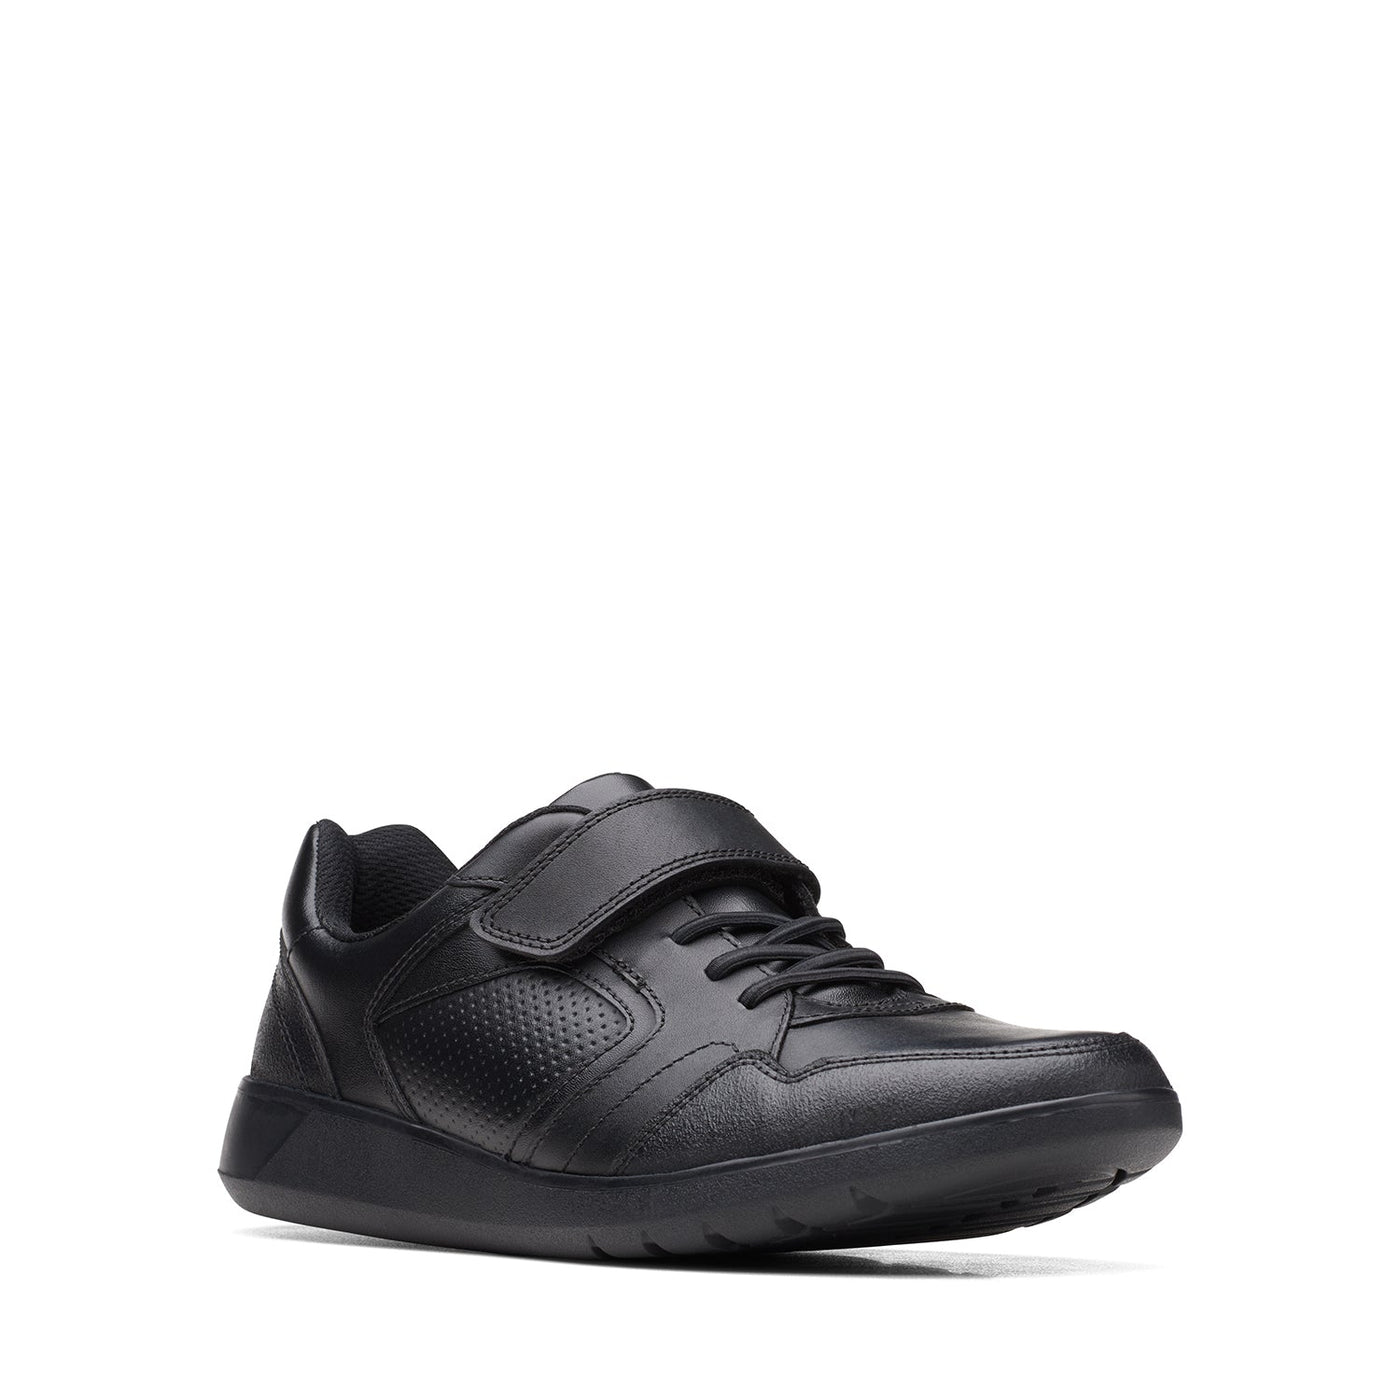 Boys - Scape Bright Youth Black Leather